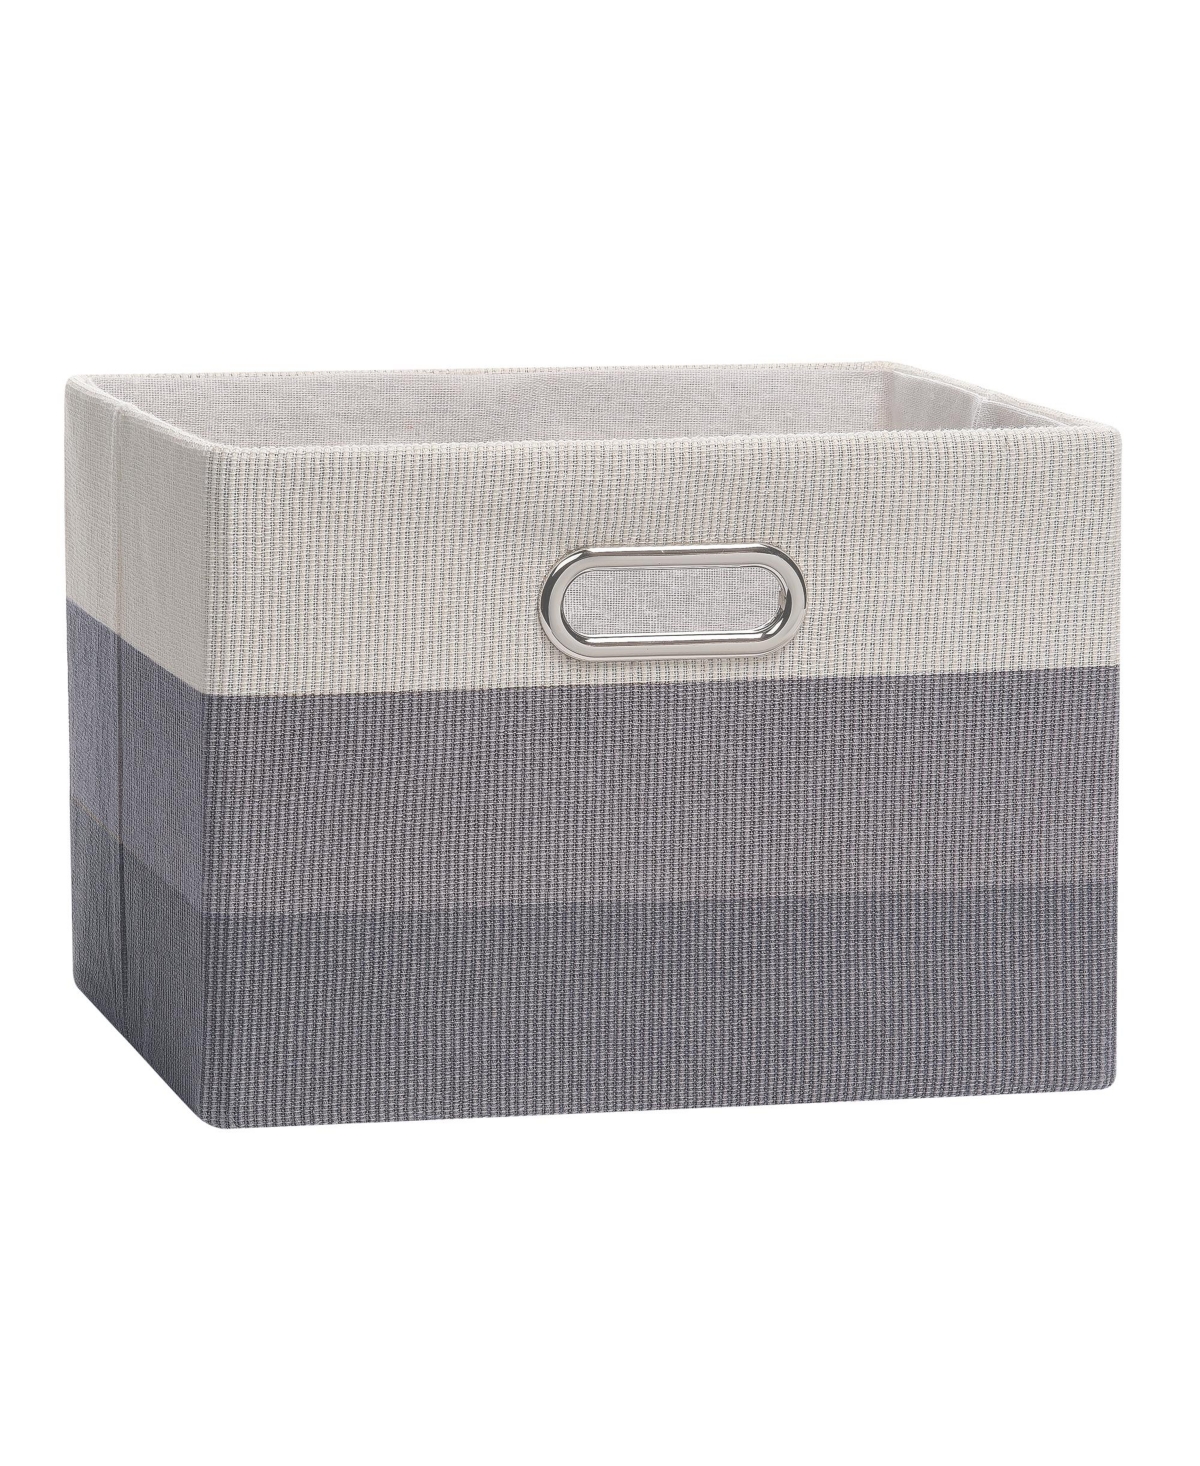 Gray Ombre Foldable/Collapsible Storage Bin/Basket - Gray